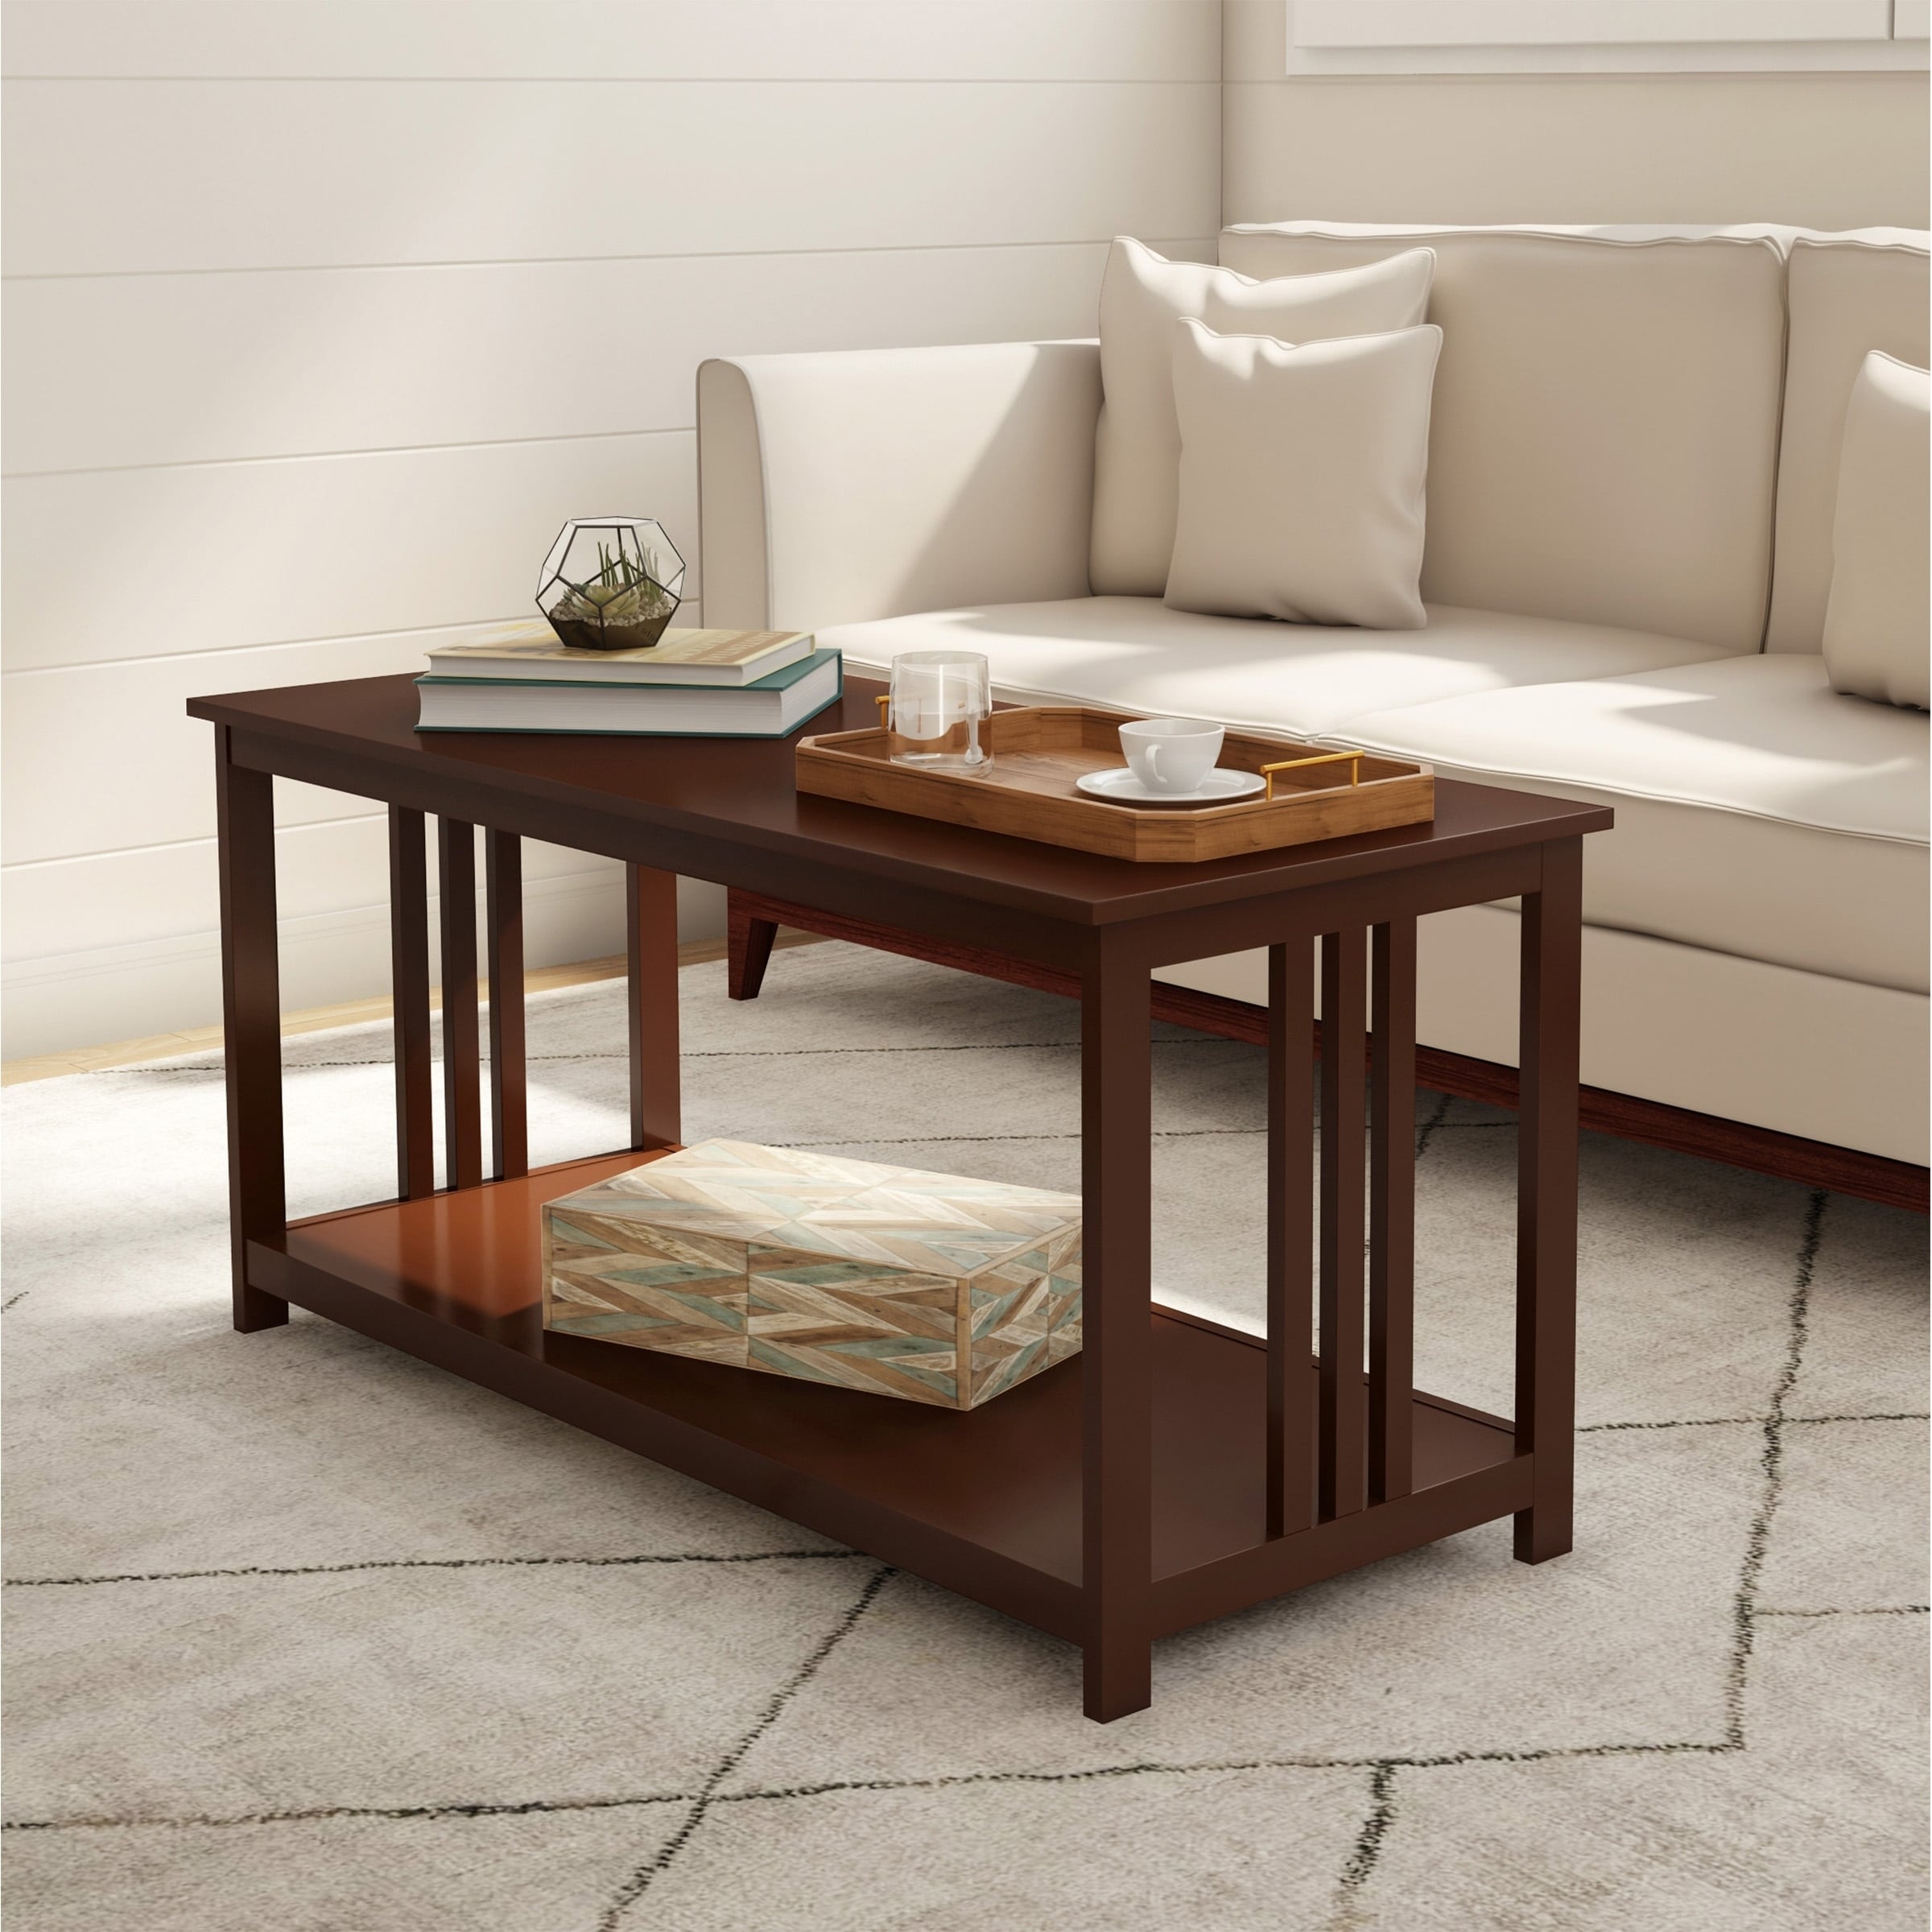 2 Tier Mission Style Coffee Table By Lavish Home On Sale Overstock 30615196